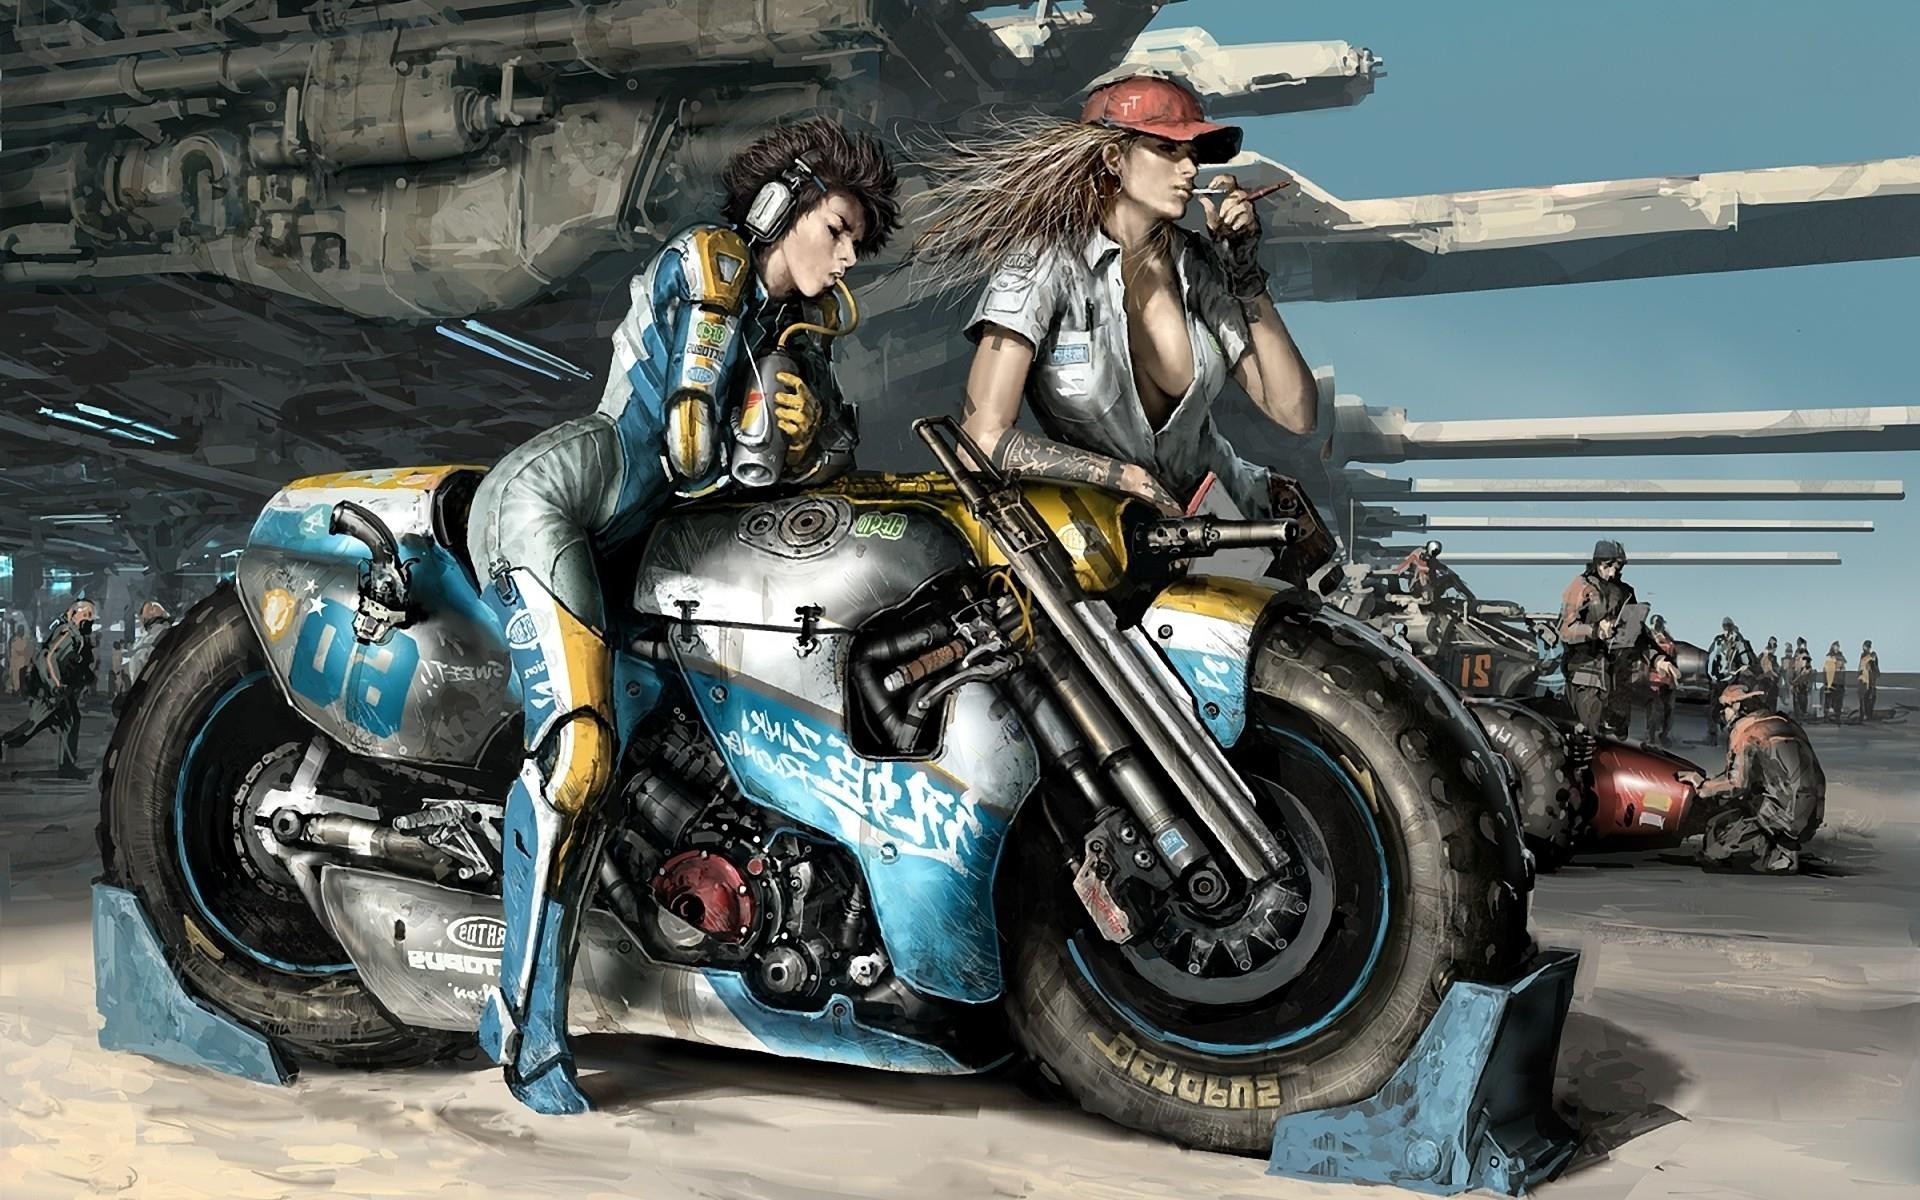 General 1920x1200 motorcycle artwork science fiction smoking women with motorcycles two women boobs big boobs vehicle futuristic science fiction women brunette dark hair